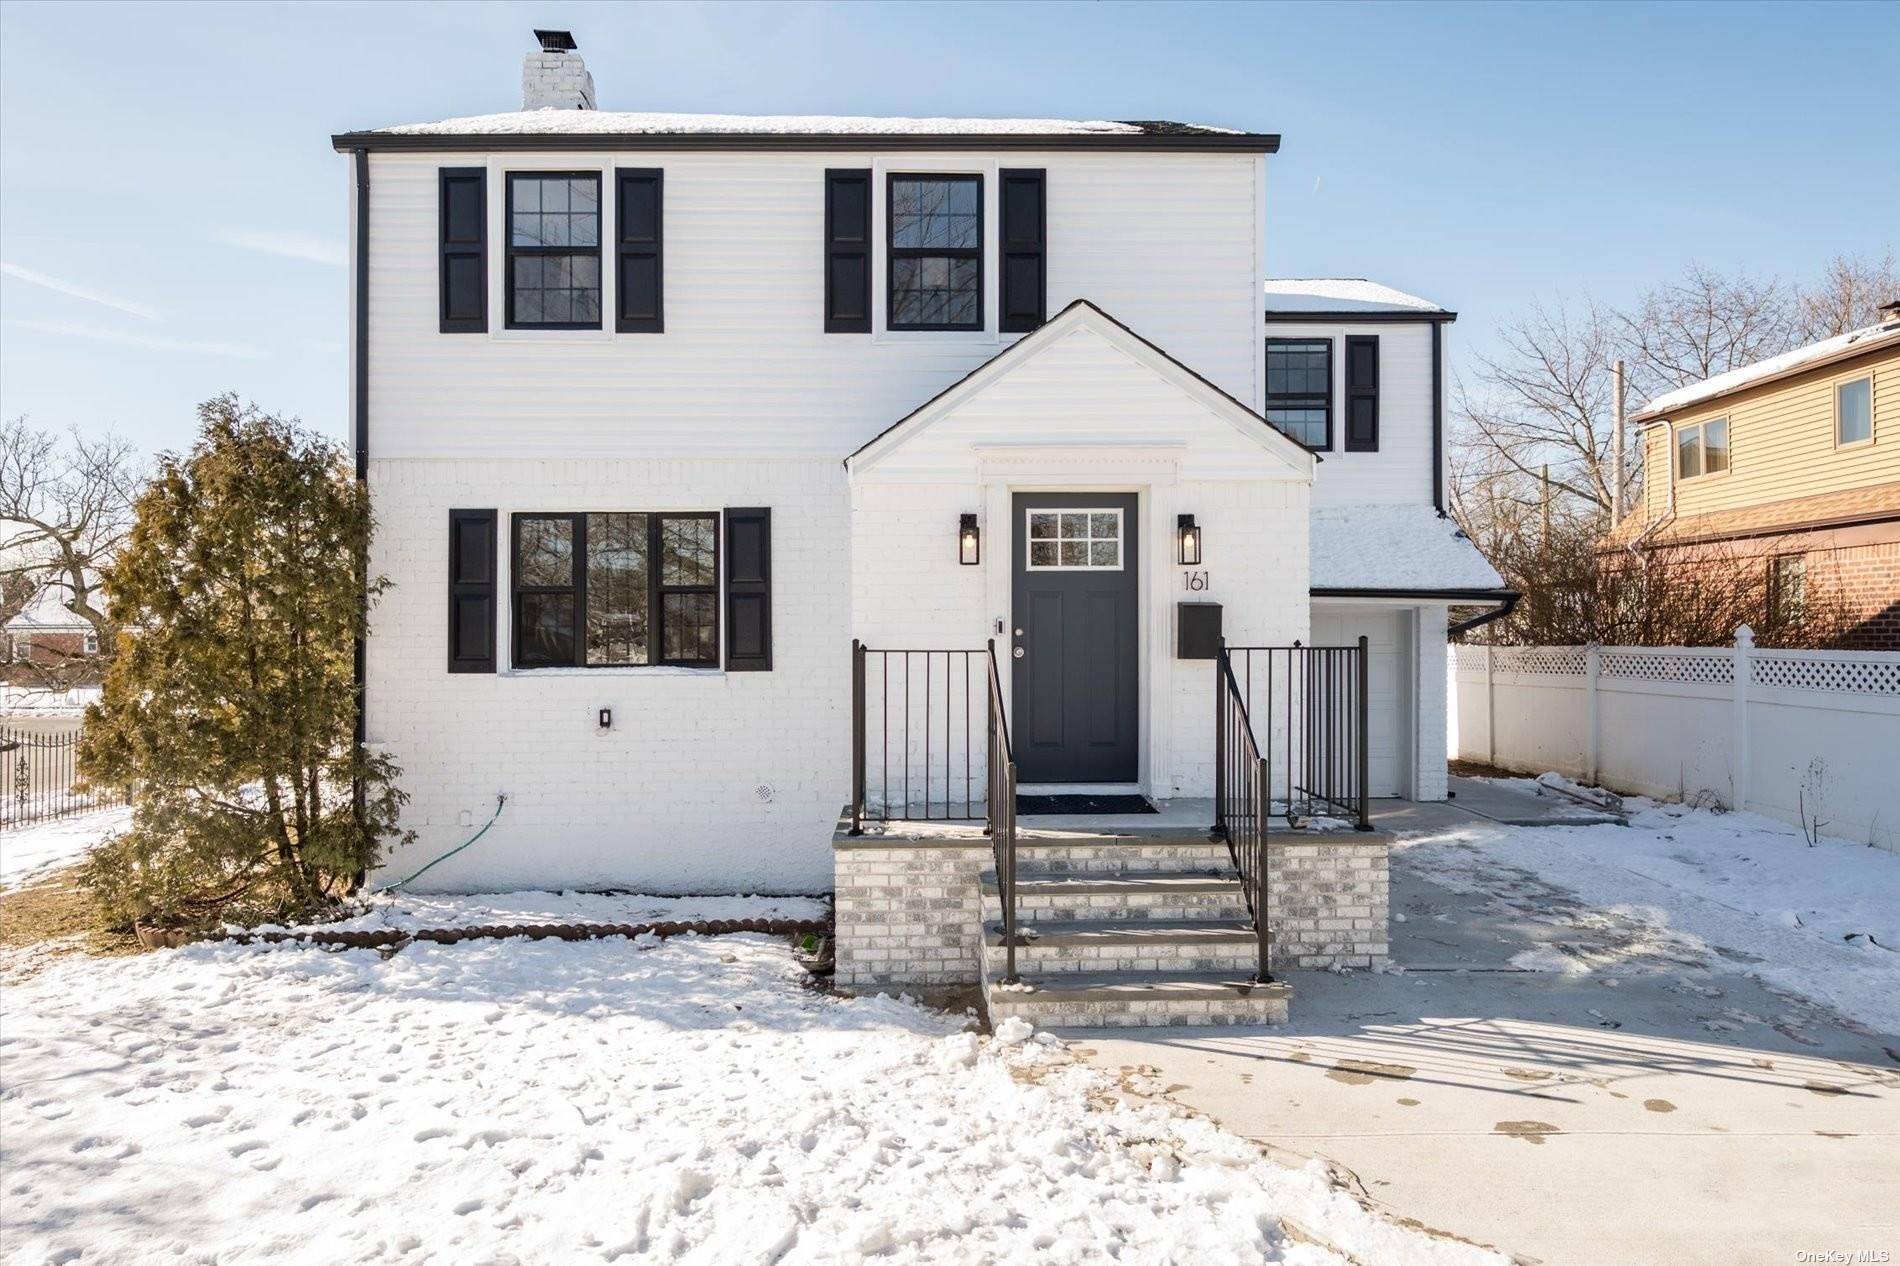 Come see this beautifully gut renovated corner lot colonial home.